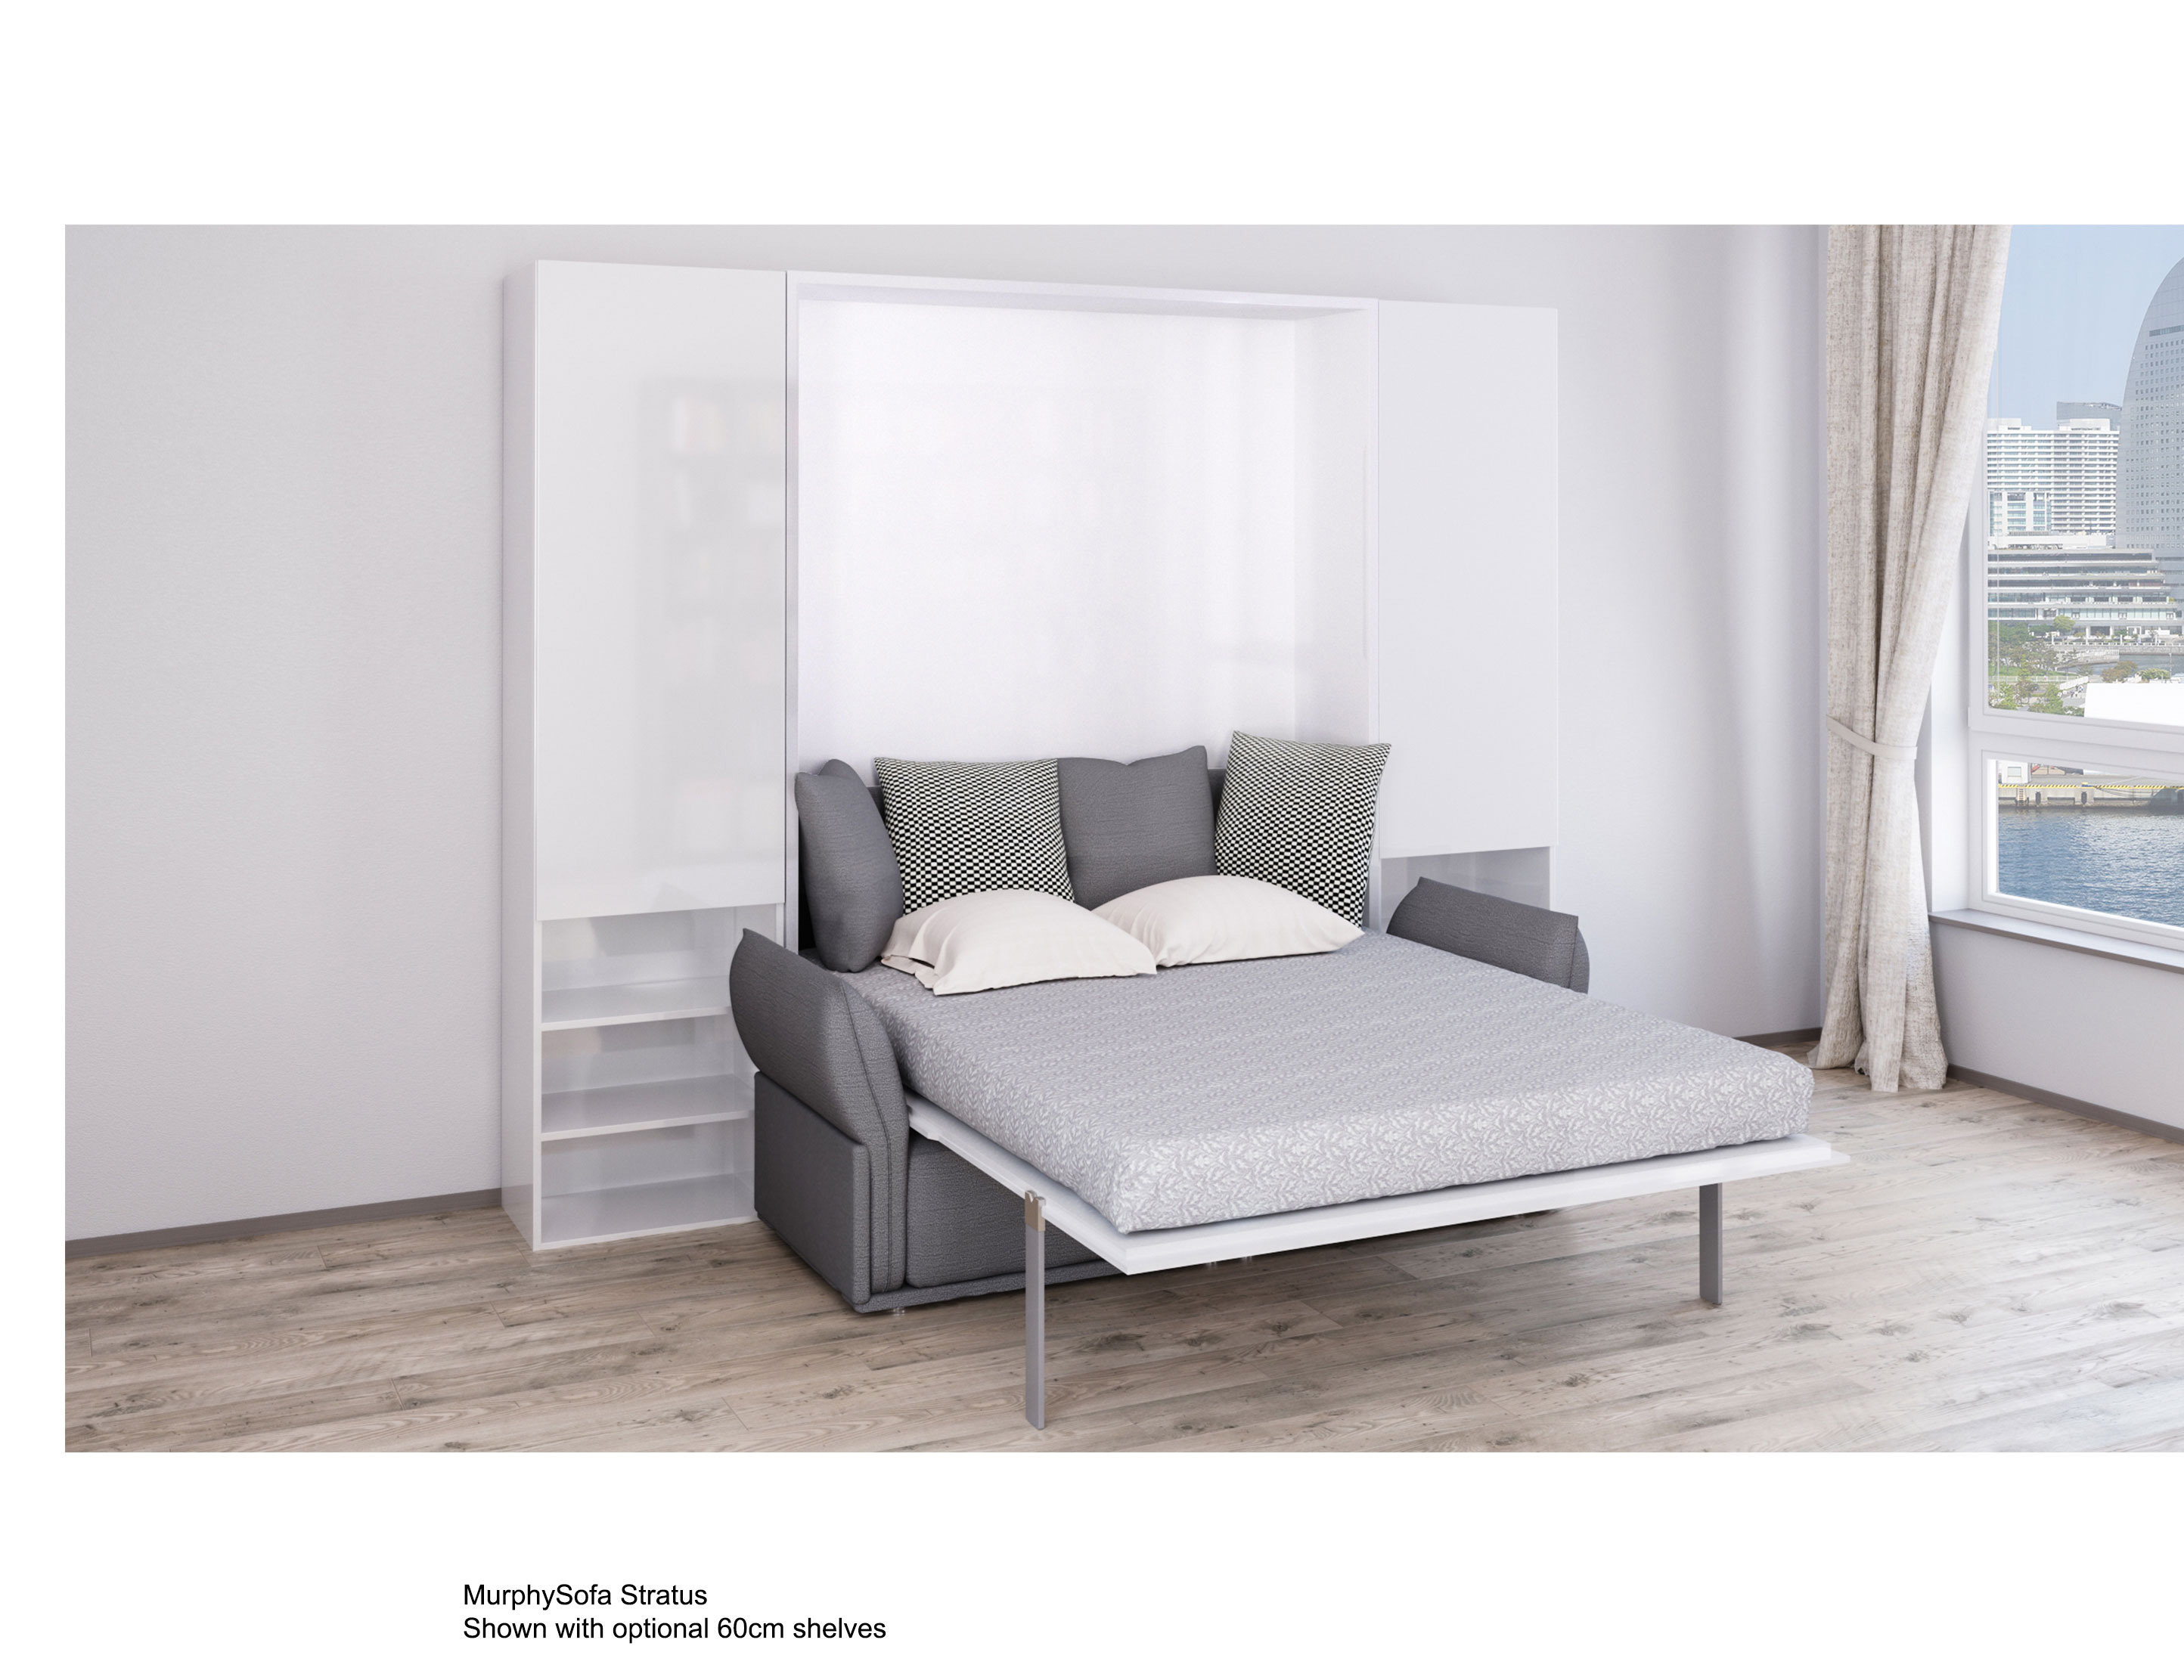 wall bed with sofa price uk